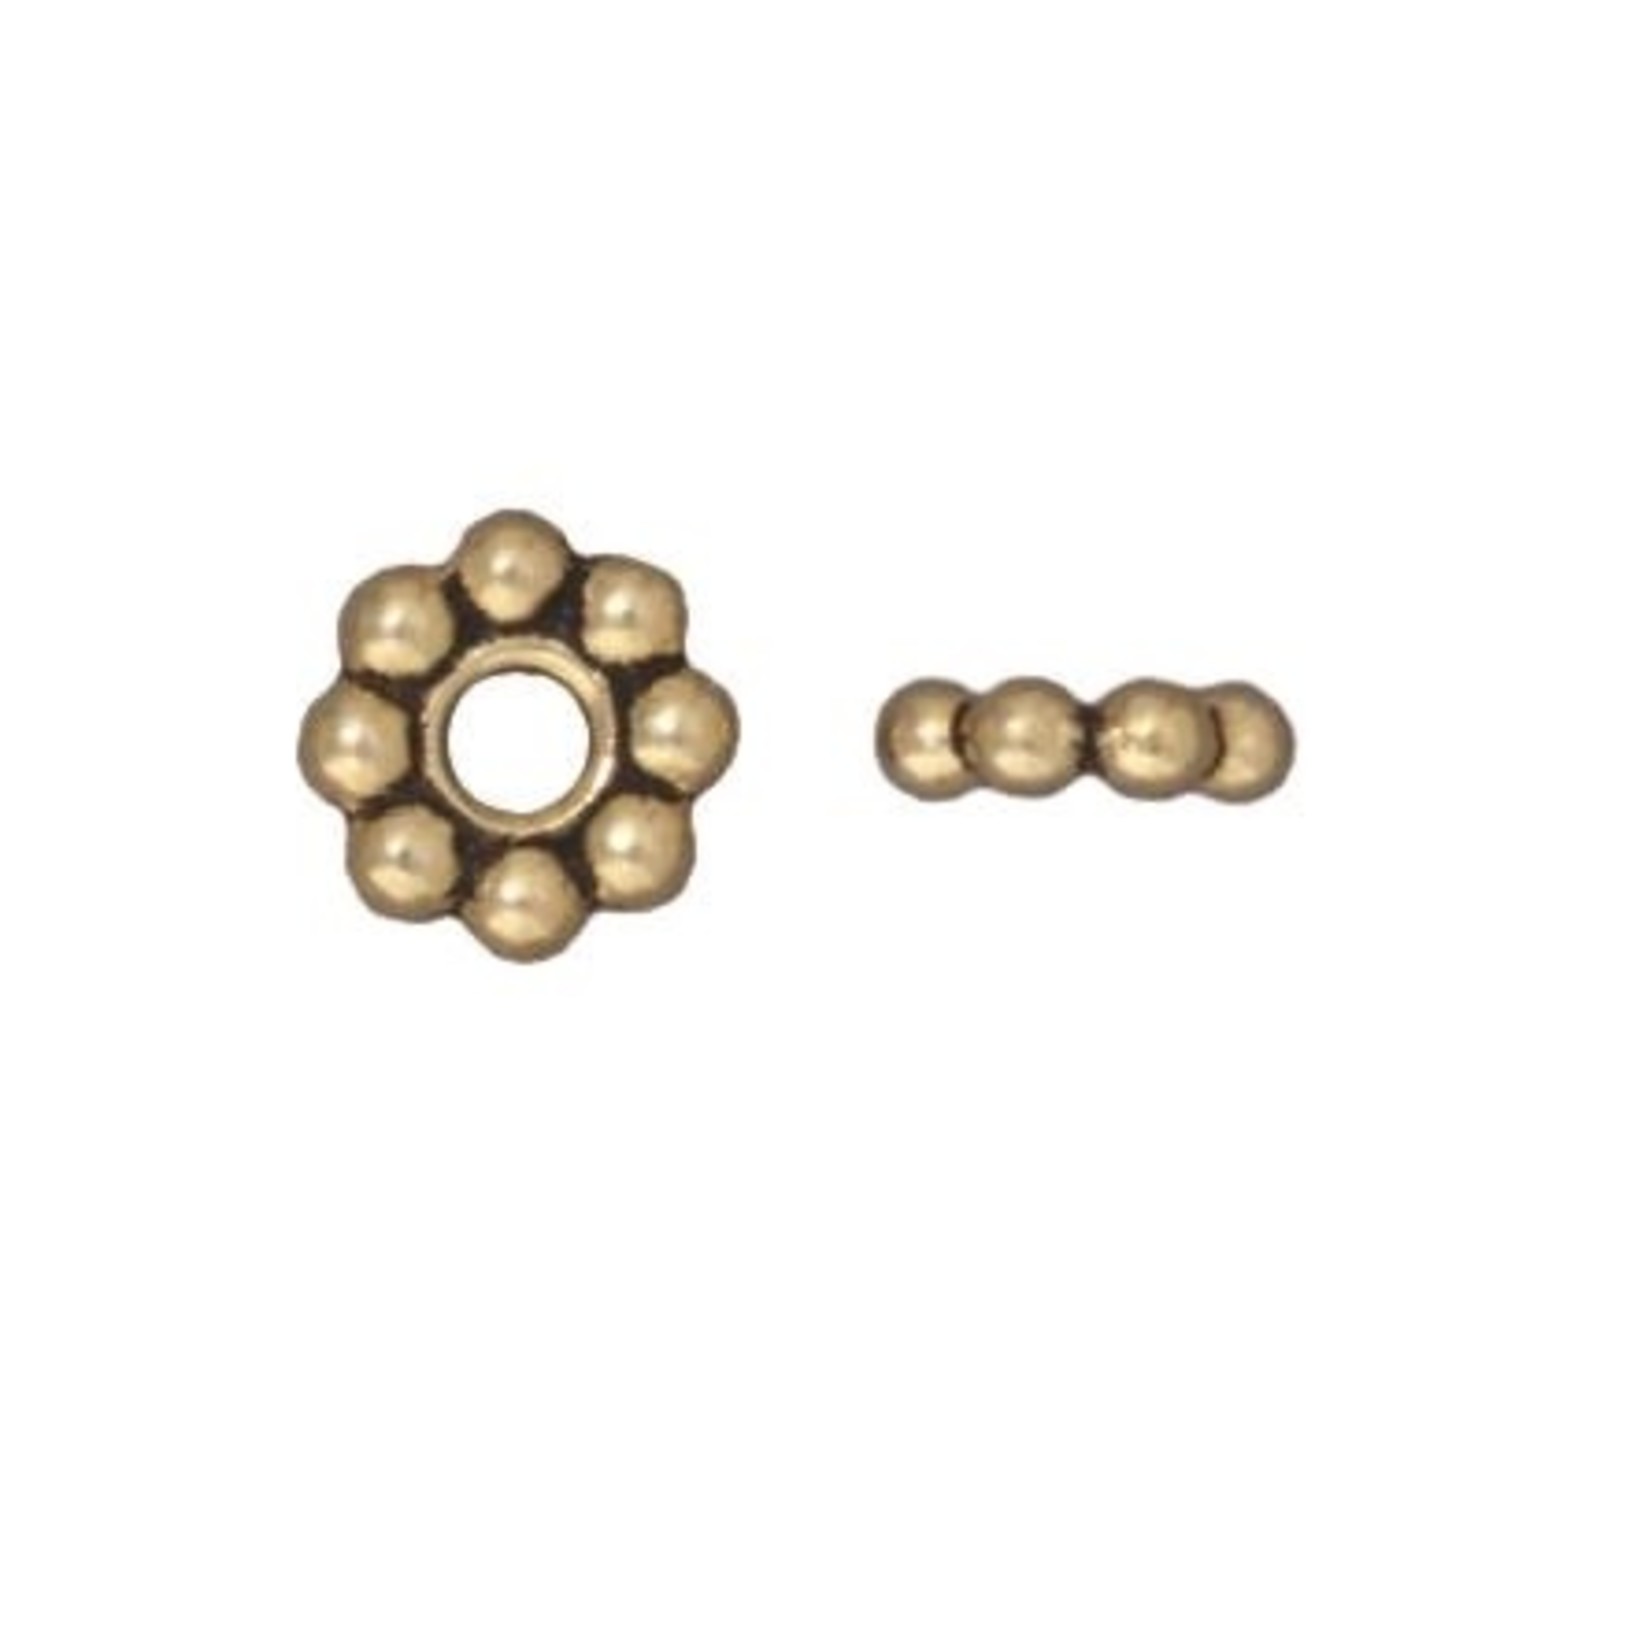 TierraCast Tierracast Antique Gold Plated 8mm Beaded Large Hole Bead